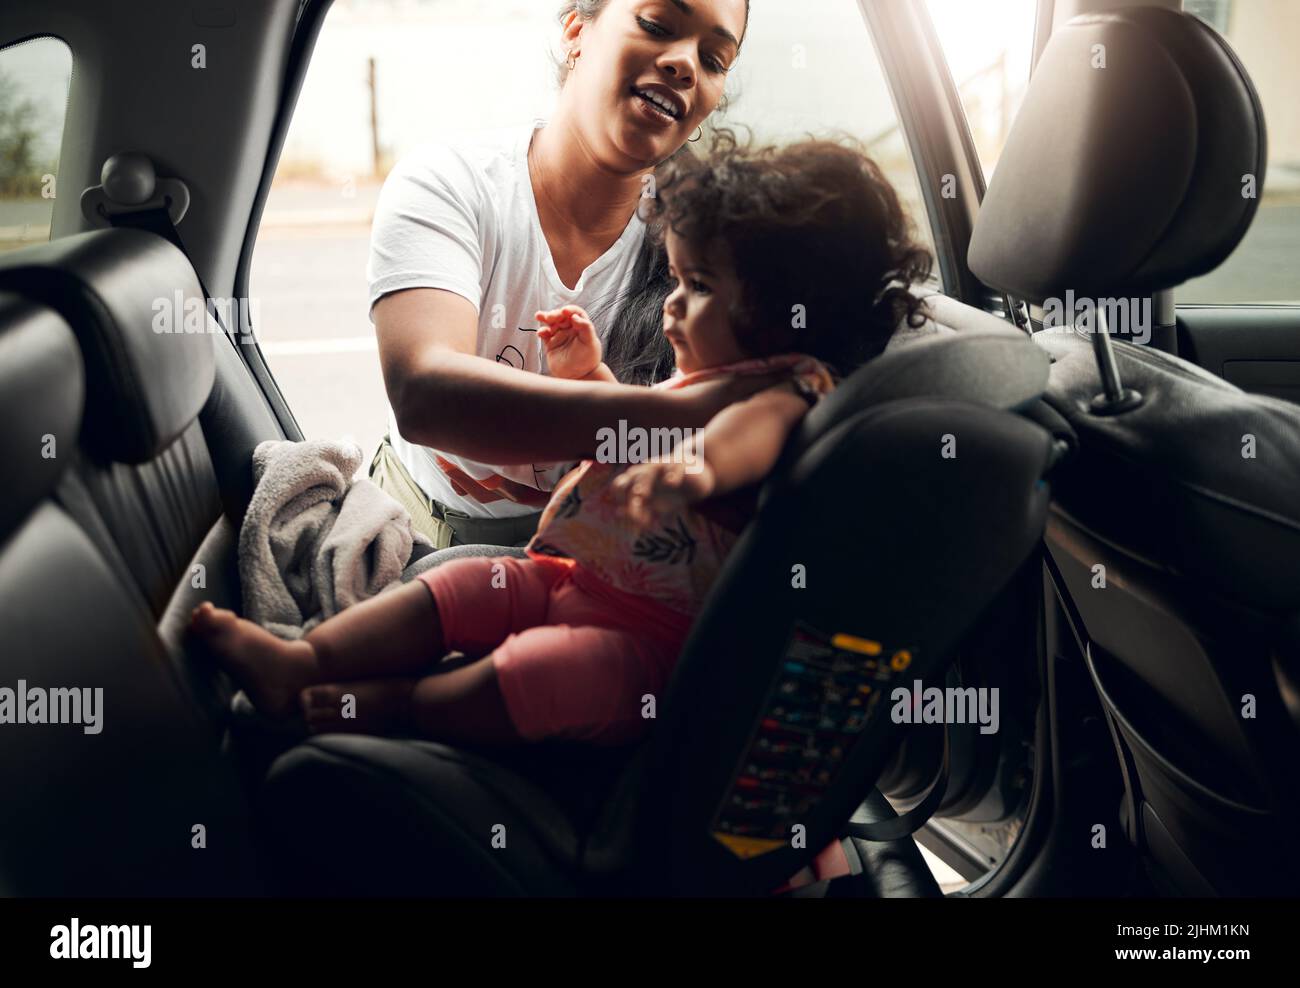 Doing it all by herself. a young woman strapping her baby into her car seat. Stock Photo